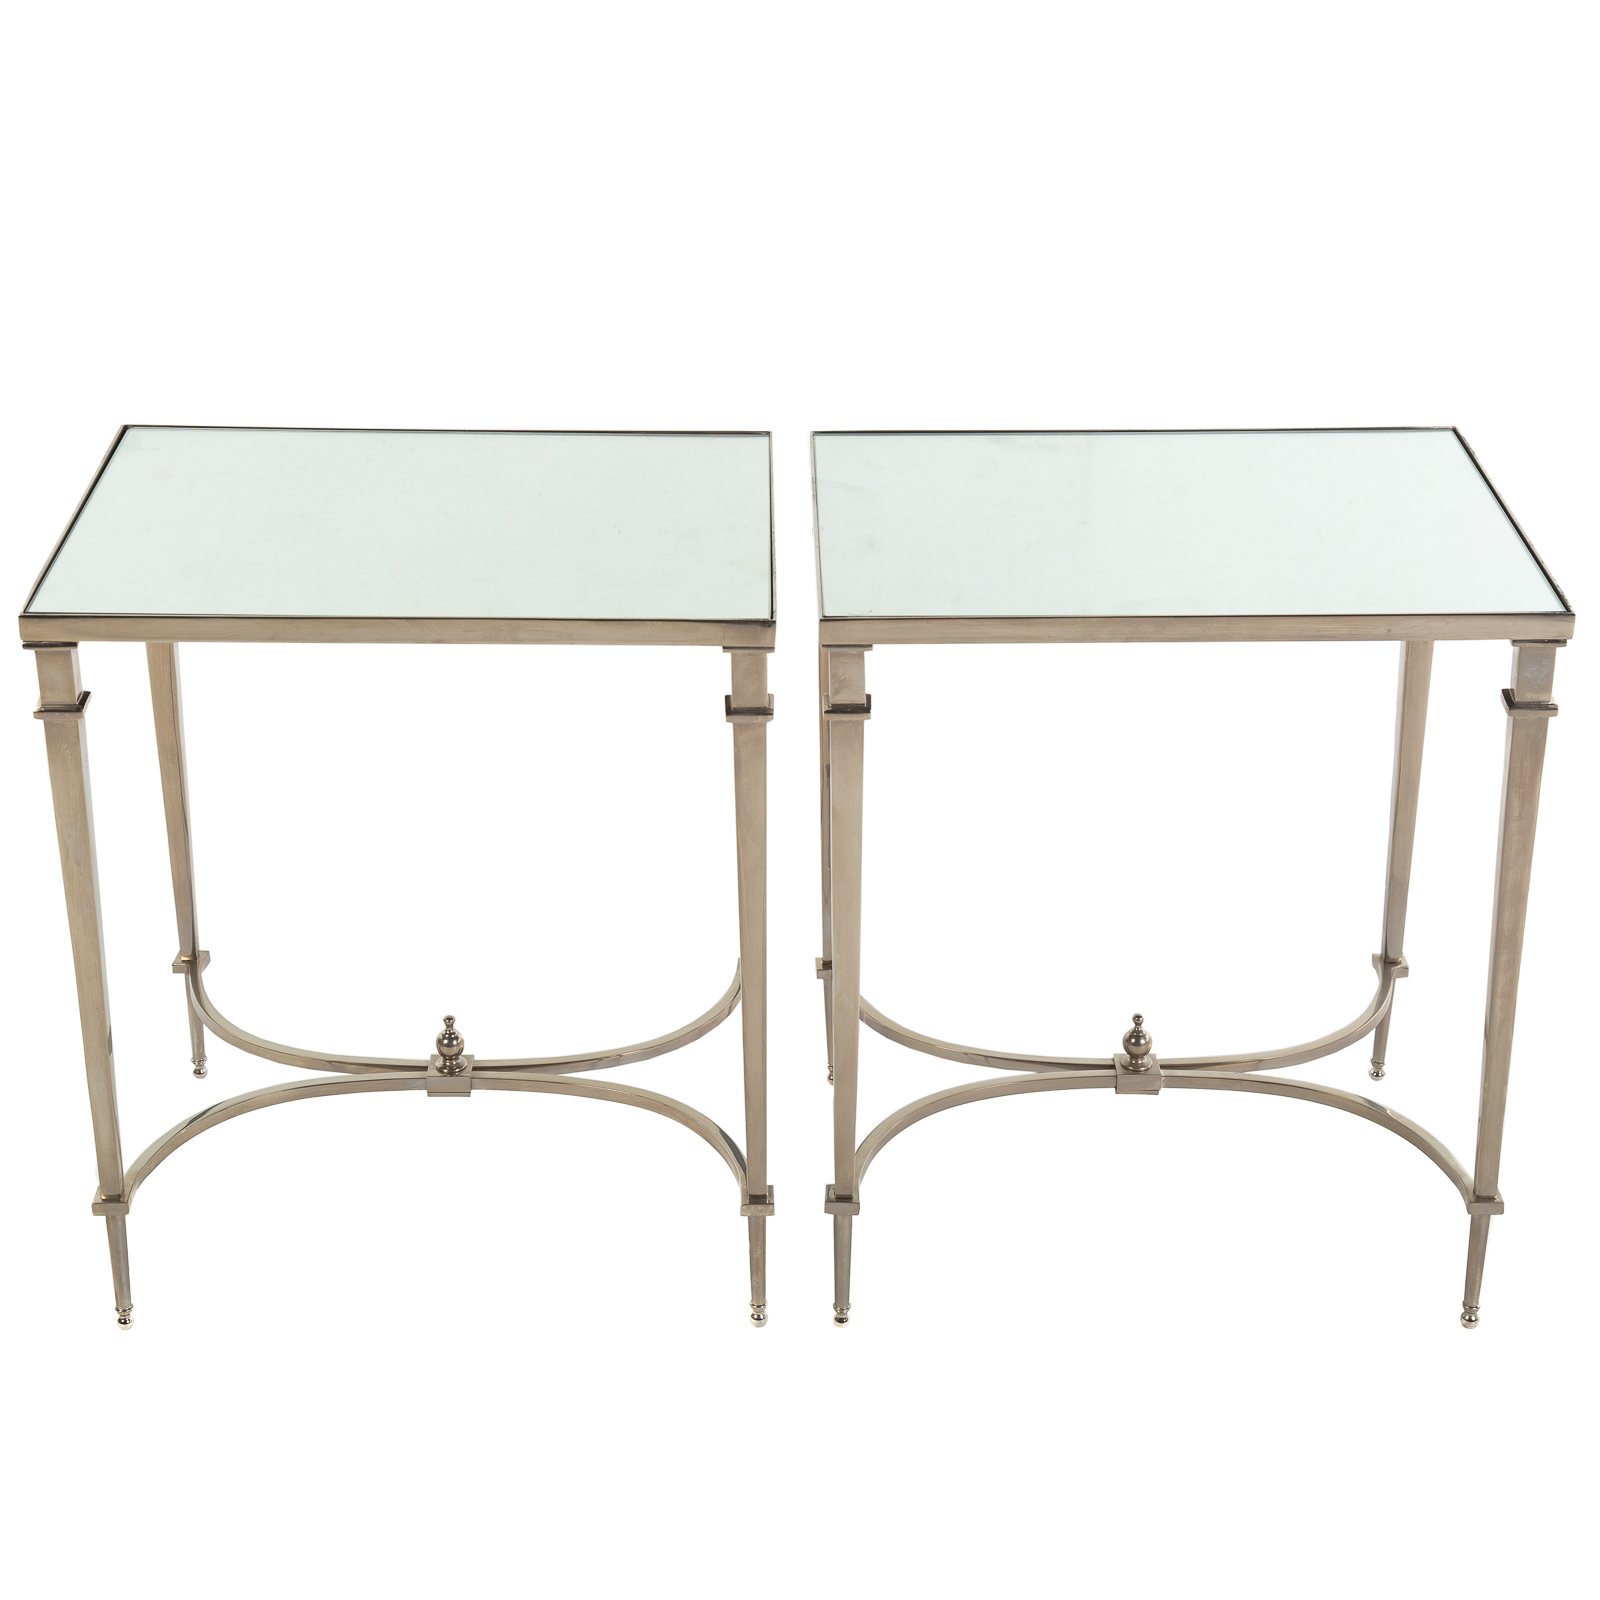 A PAIR OF CONTEMPORARY SIDE TABLES With